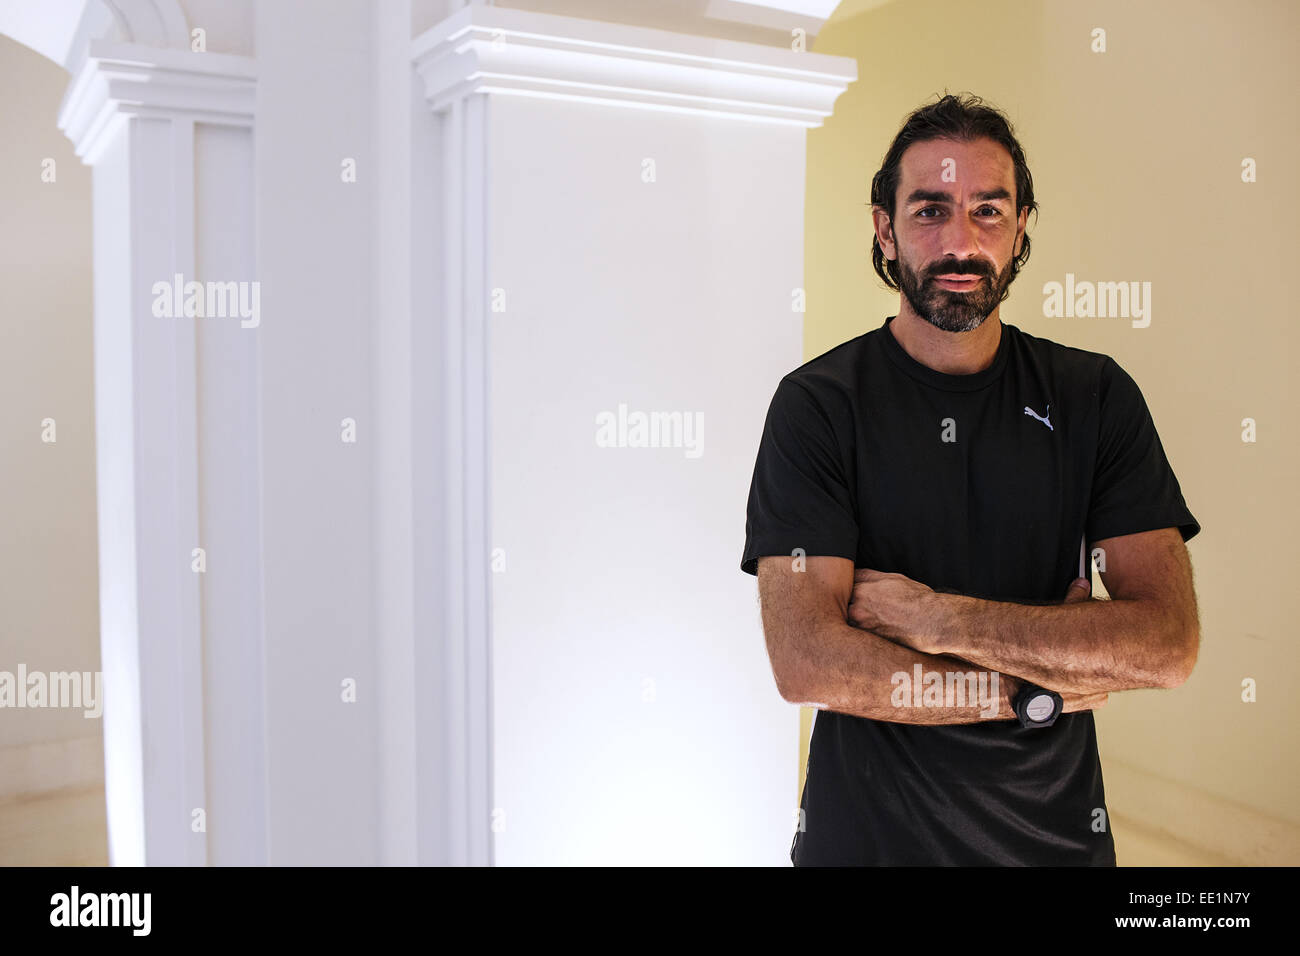 A portrait of Robert Pires - a French football player who plays for FC Goa in the Indian Super League. Goa, India, 2014 Stock Photo